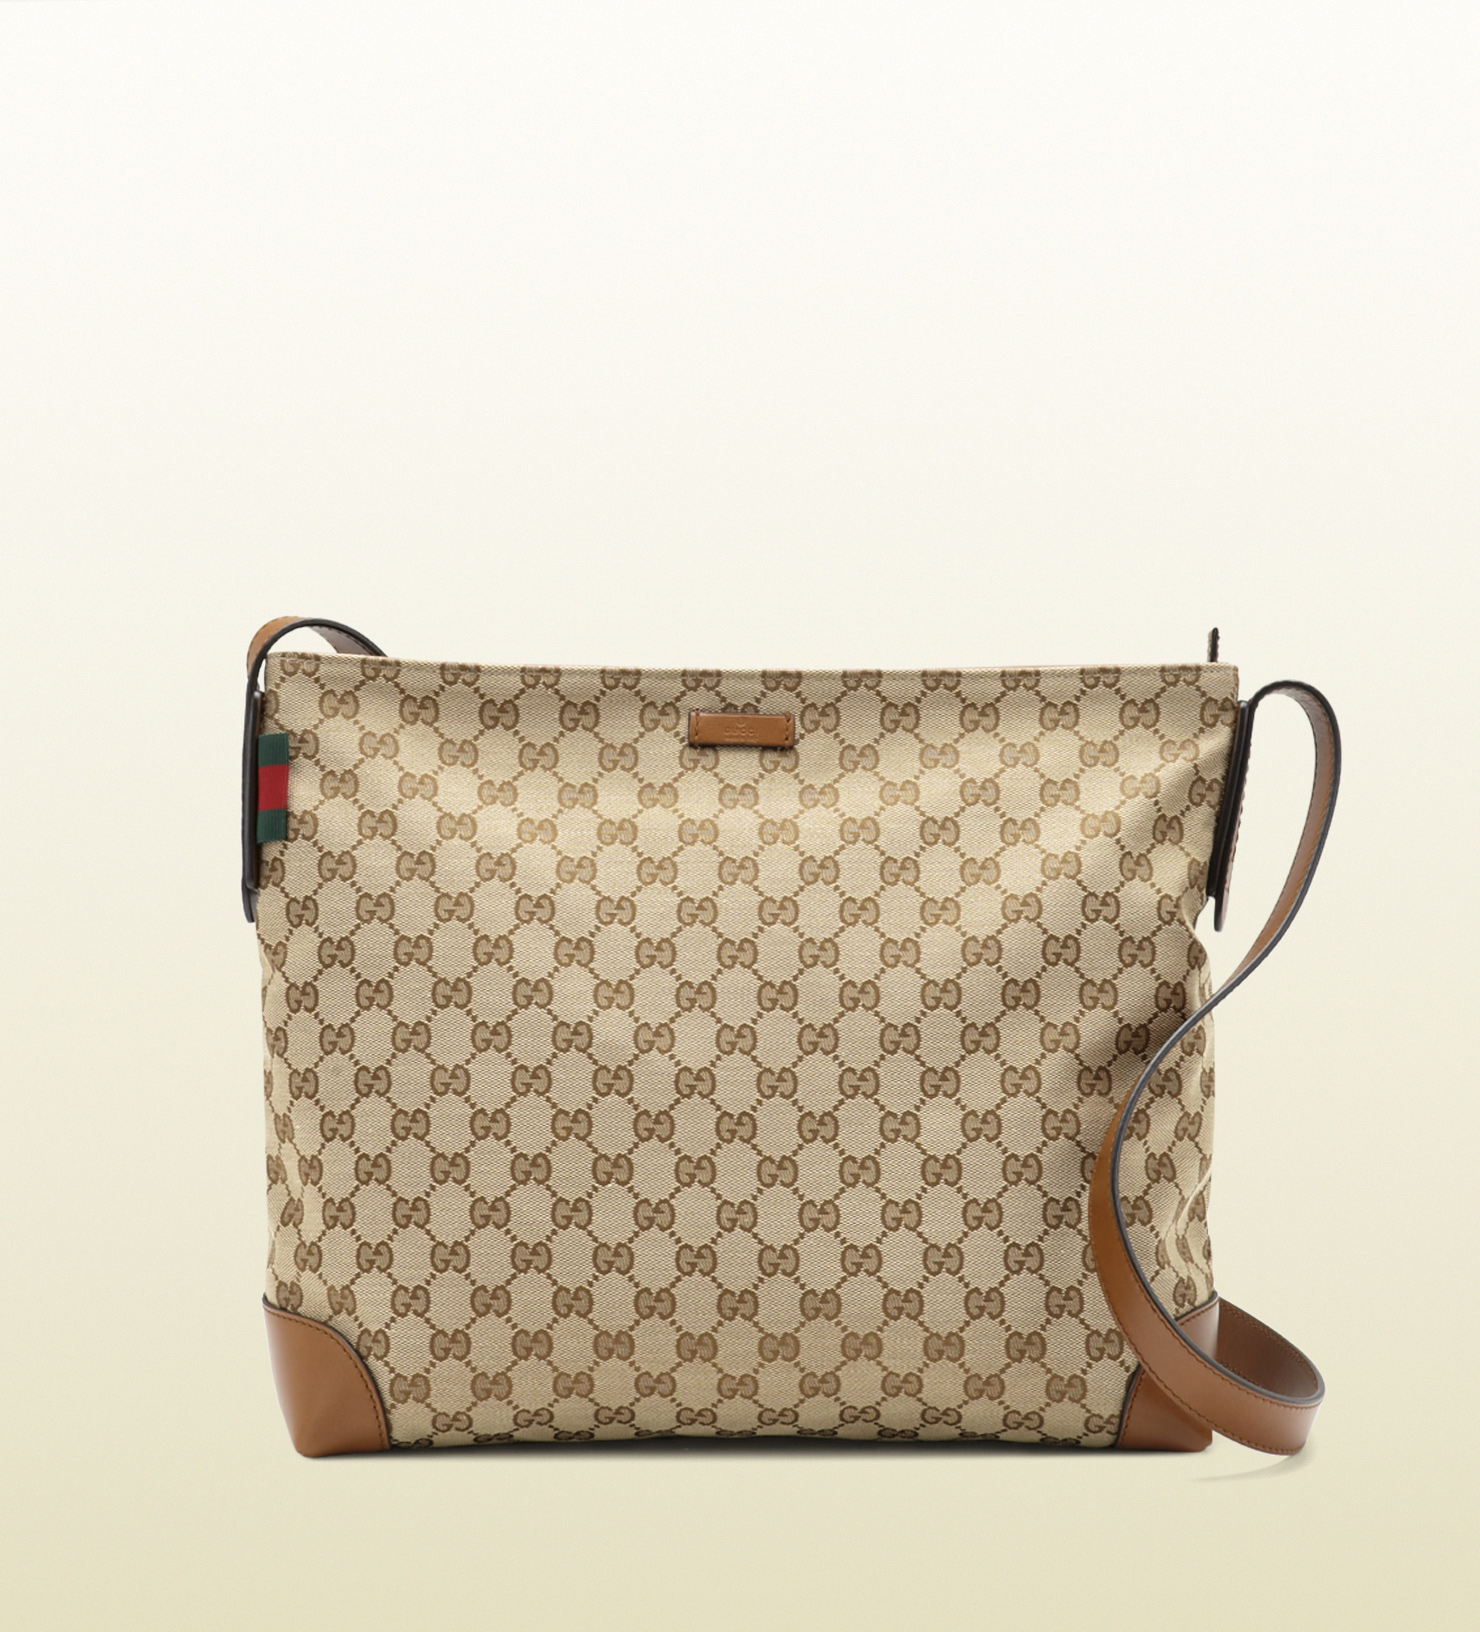 Lyst - Gucci Large Original Gg Canvas Messenger Bag in Brown